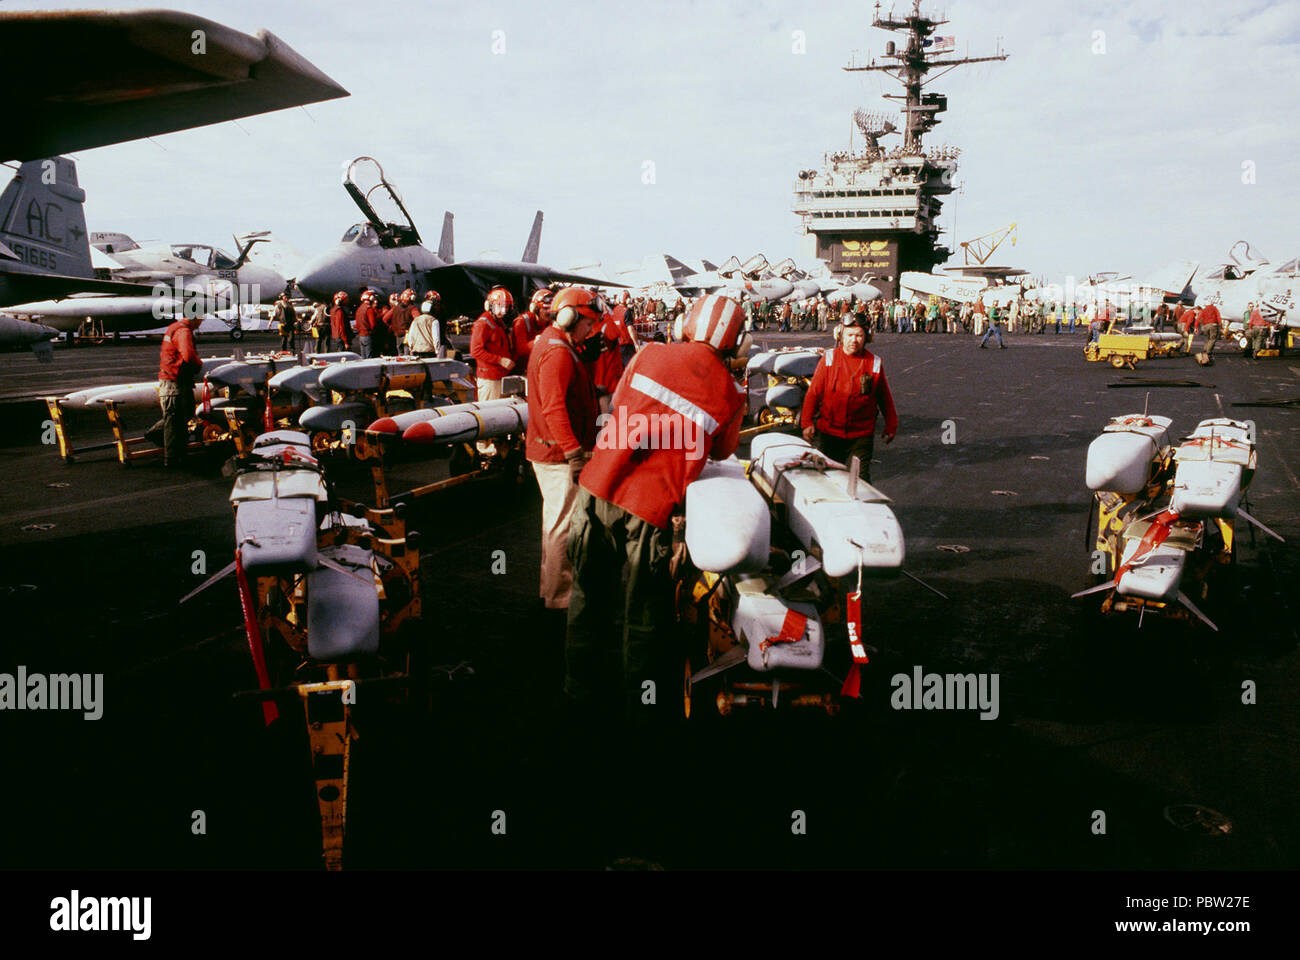 ADM-141 TALD ready to load. Aviation ordnancemen prepare to load ADM-141 tactical air-launched decoys onto aircraft on the flight deck of the aircraft carrier USS JOHN F. KENNEDY (CV-67).  The planes are being fitted for strikes on Iraqi targets at the onset of Operation Desert Storm. Stock Photo